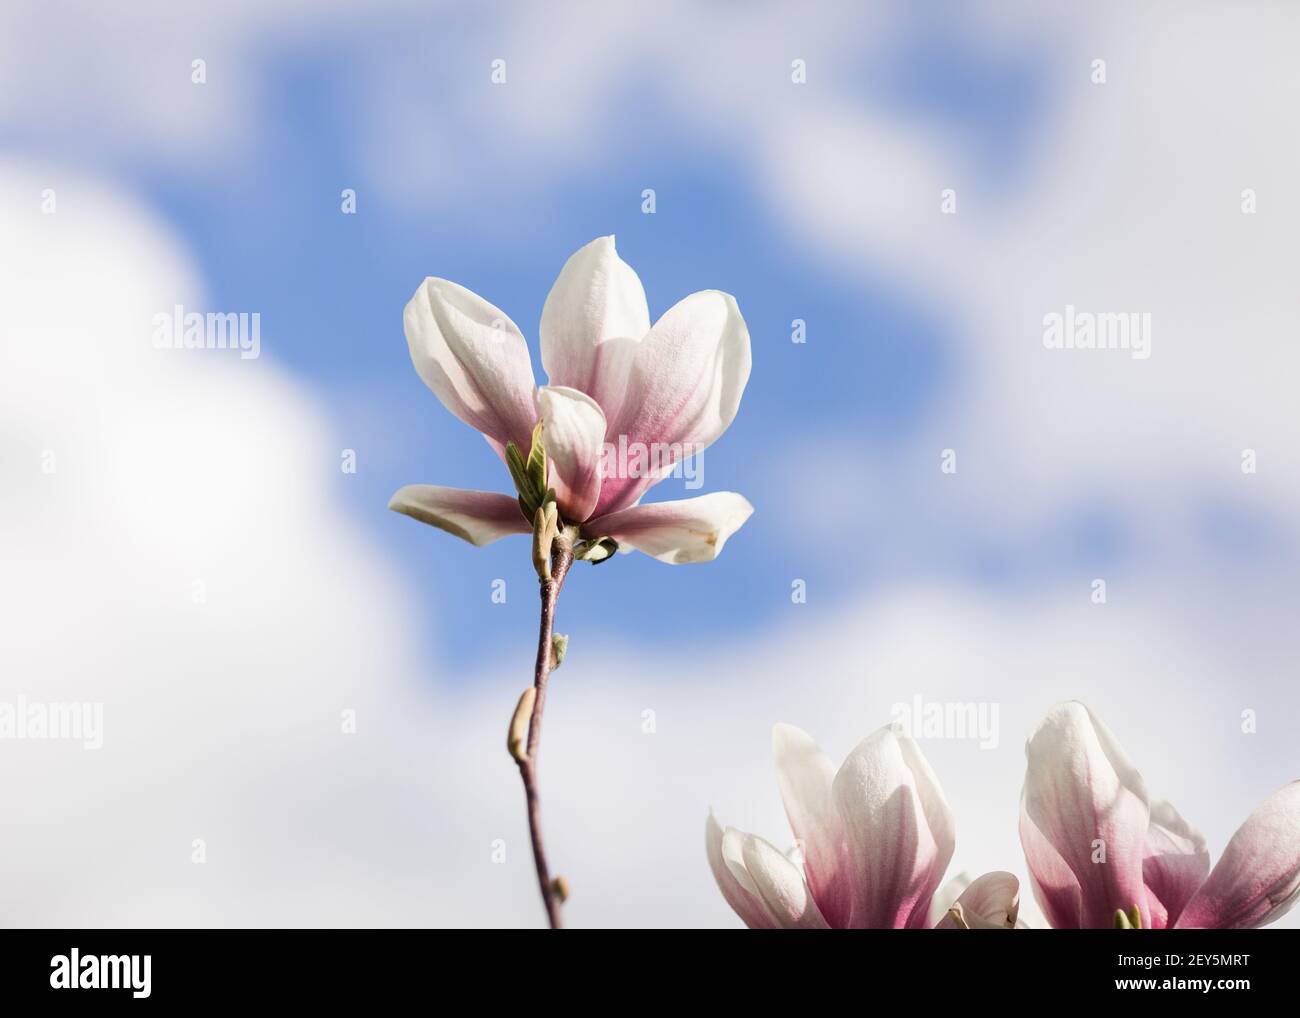 Pink and white magnolia blossoms against blue spring sky with clouds Stock Photo